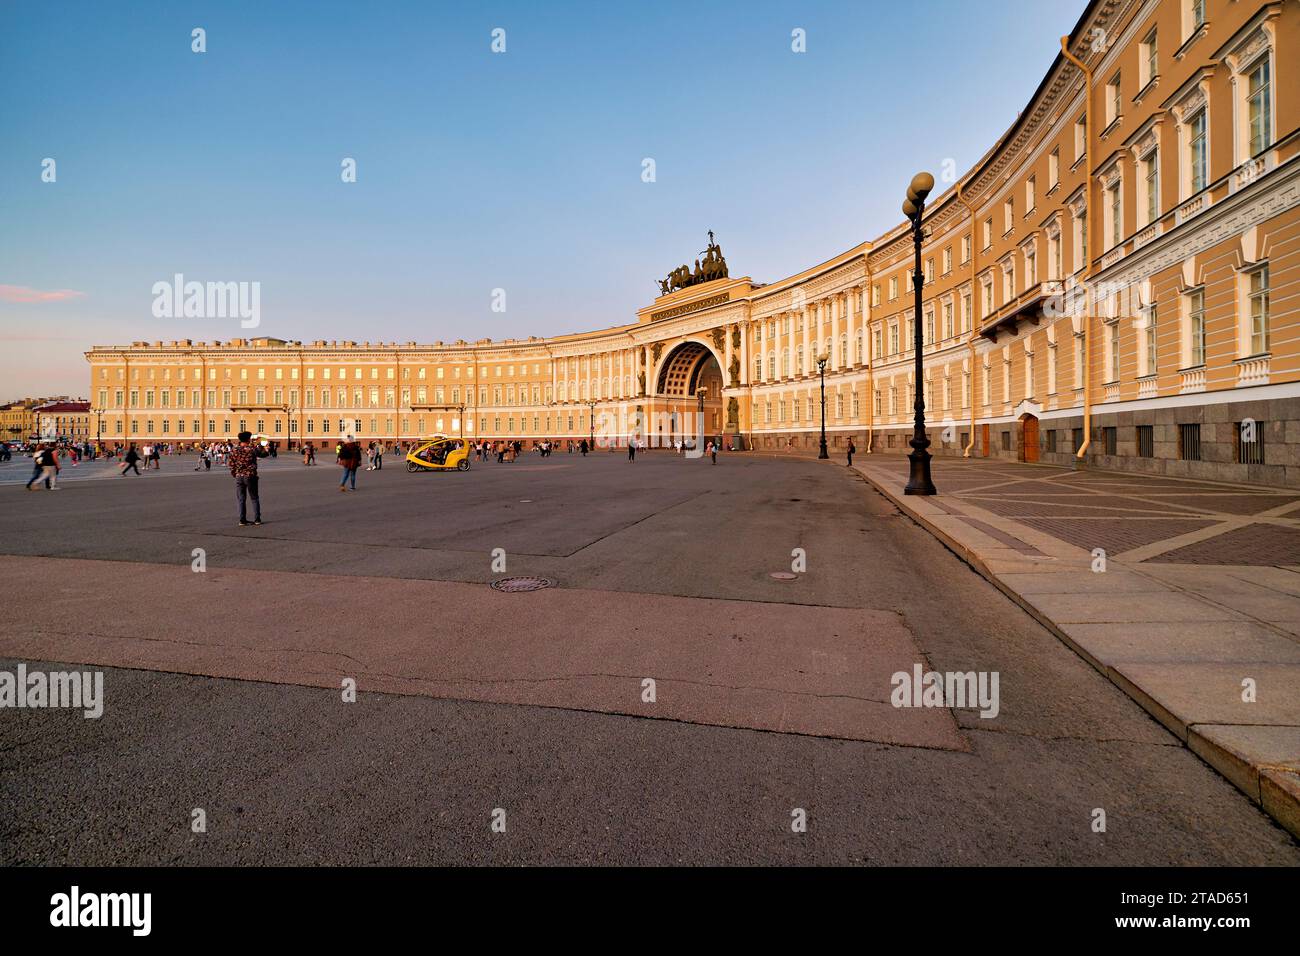 St. Petersburg Russia. The General Staff Building - Hermitage Museum Stock Photo